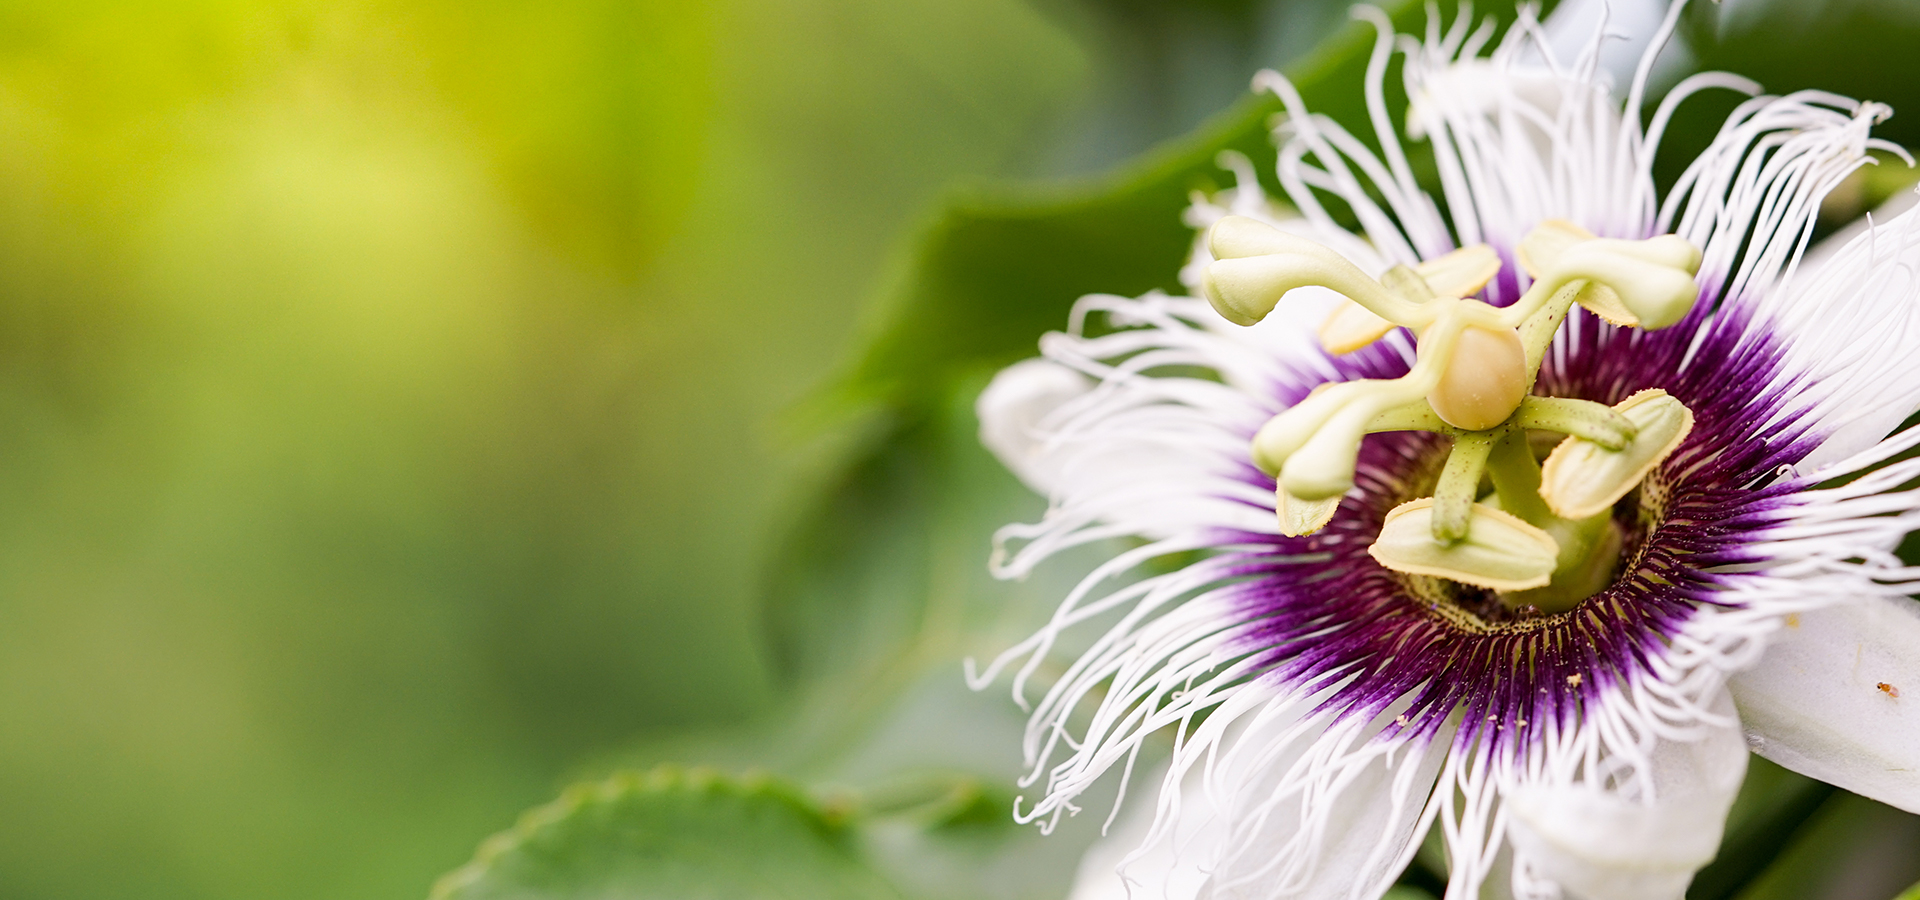 THE PASSION FLOWER EFFECT: WHAT IS IT & HOW DOES IT WORK?